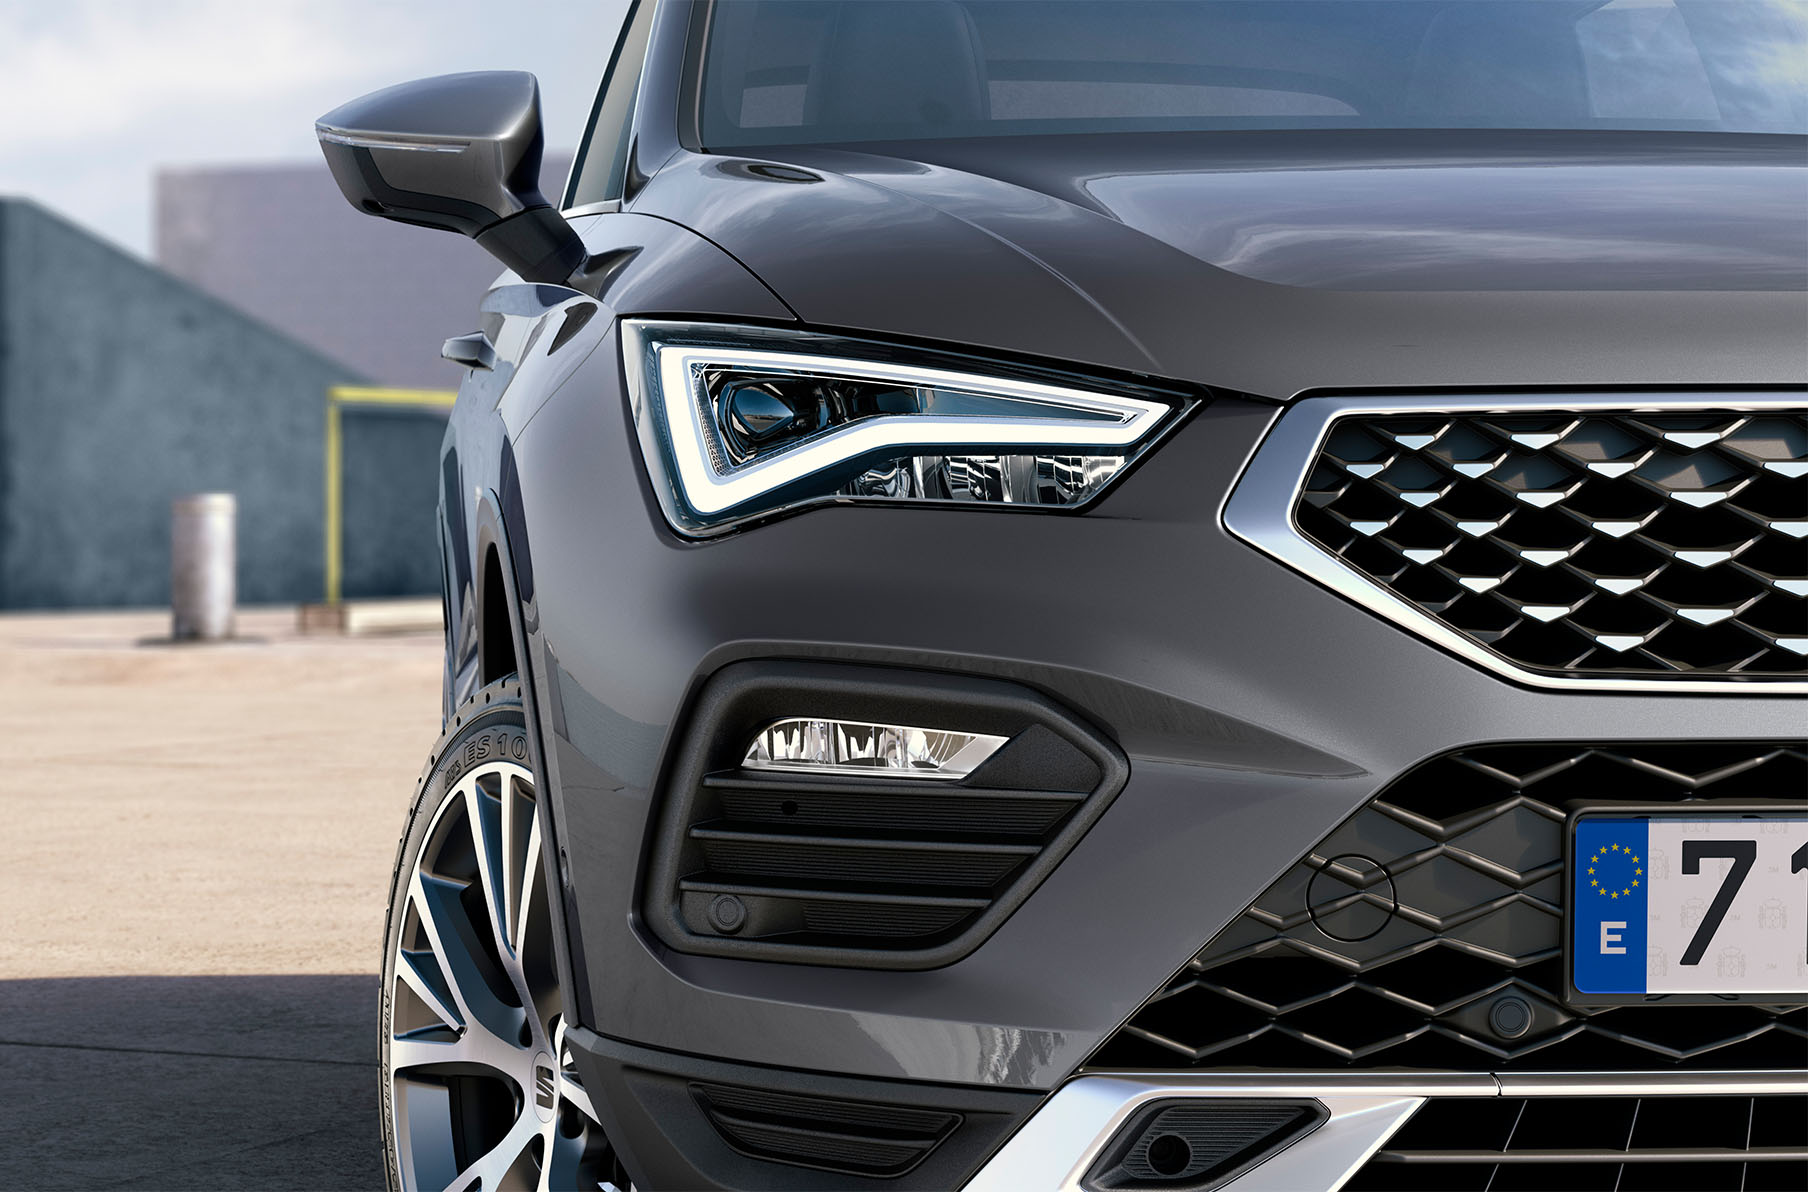 seat ateca graphite grey colour with front led headlines